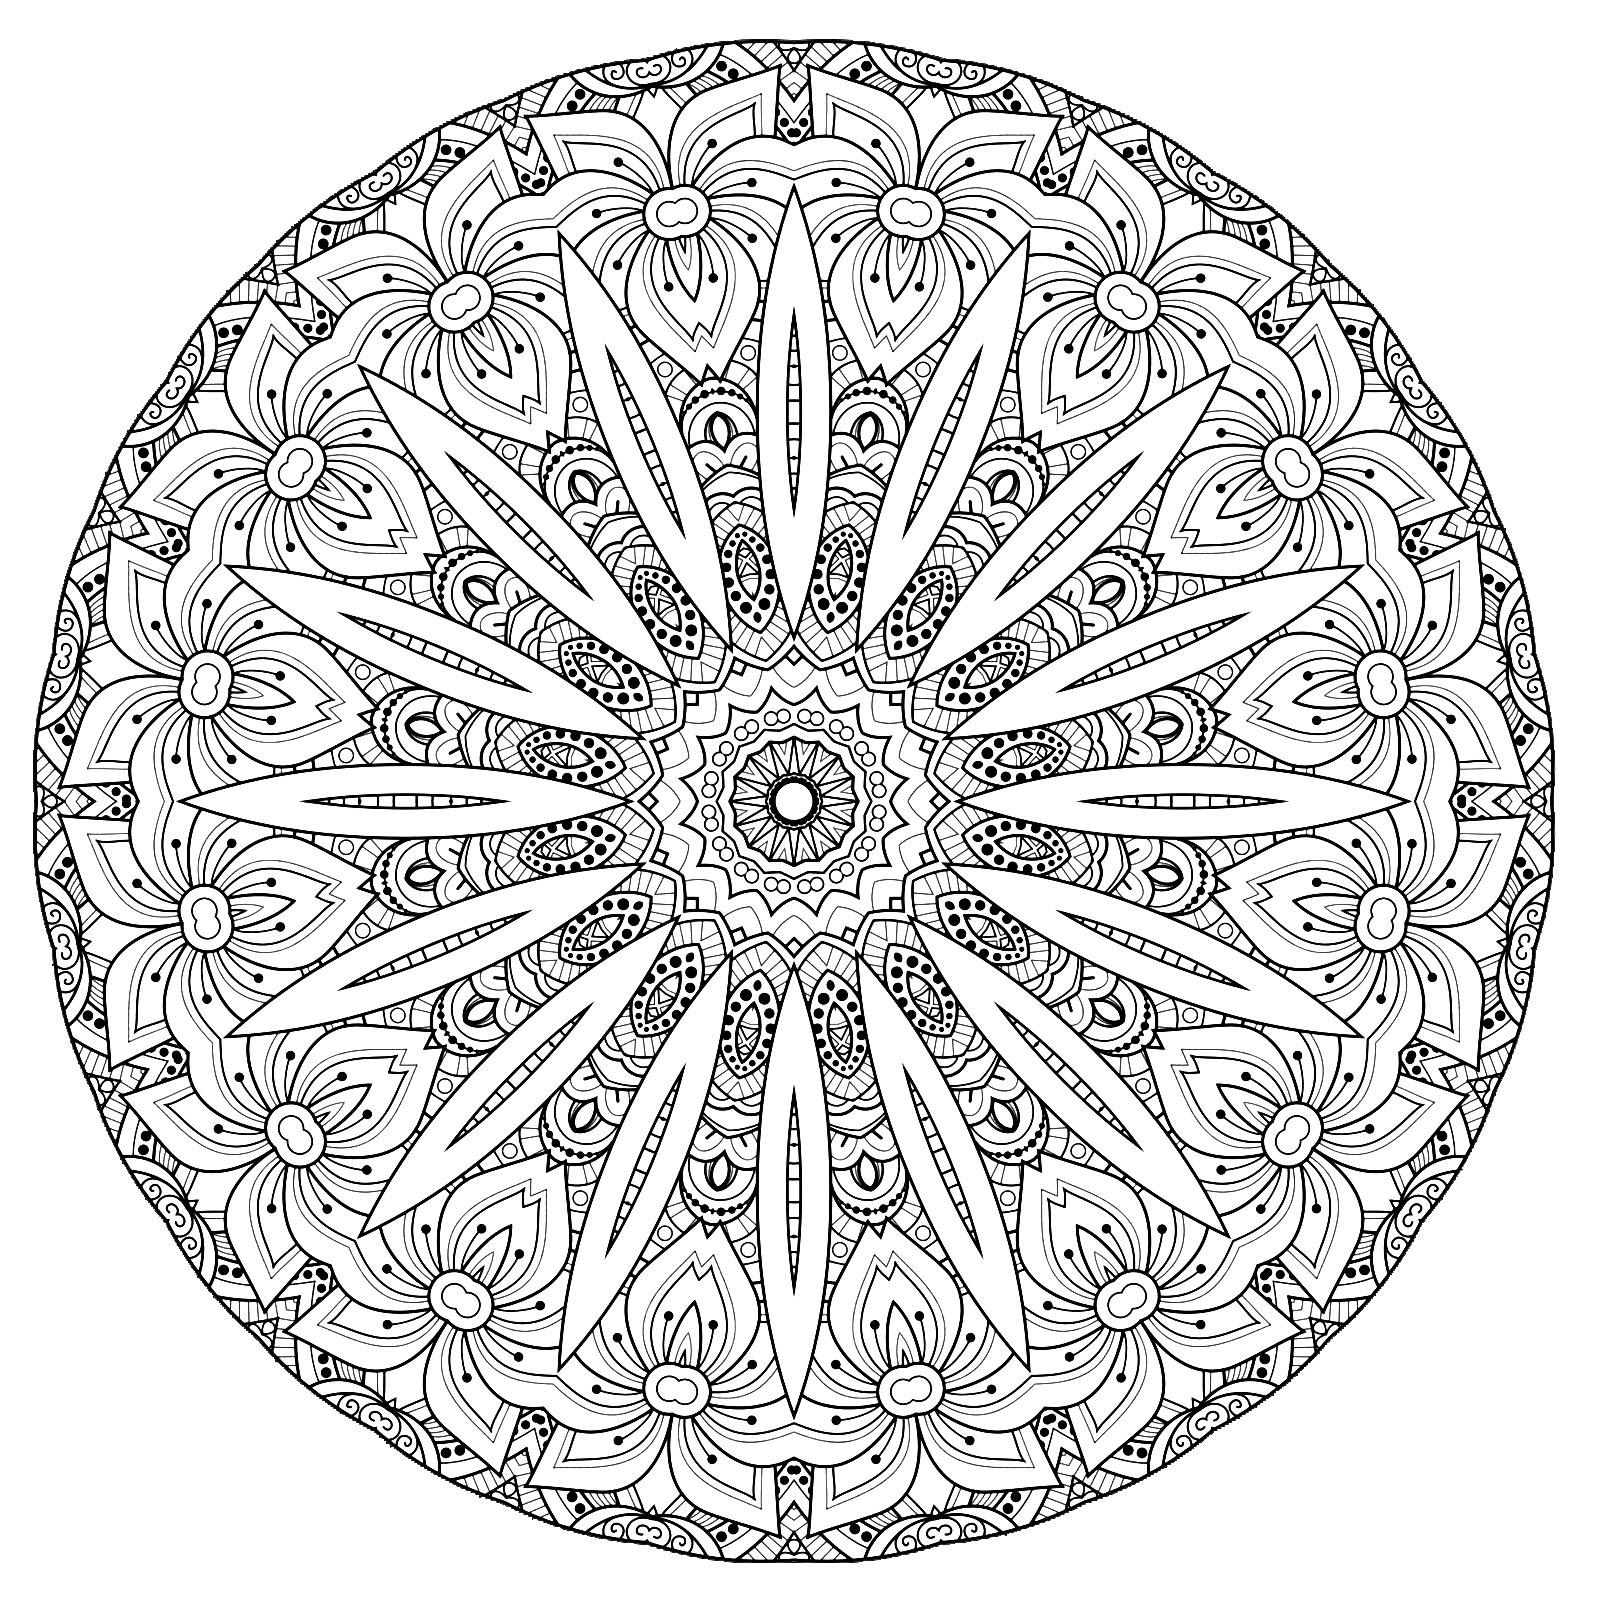 Complex Mandala with flowers - M&alas Adult Coloring Pages